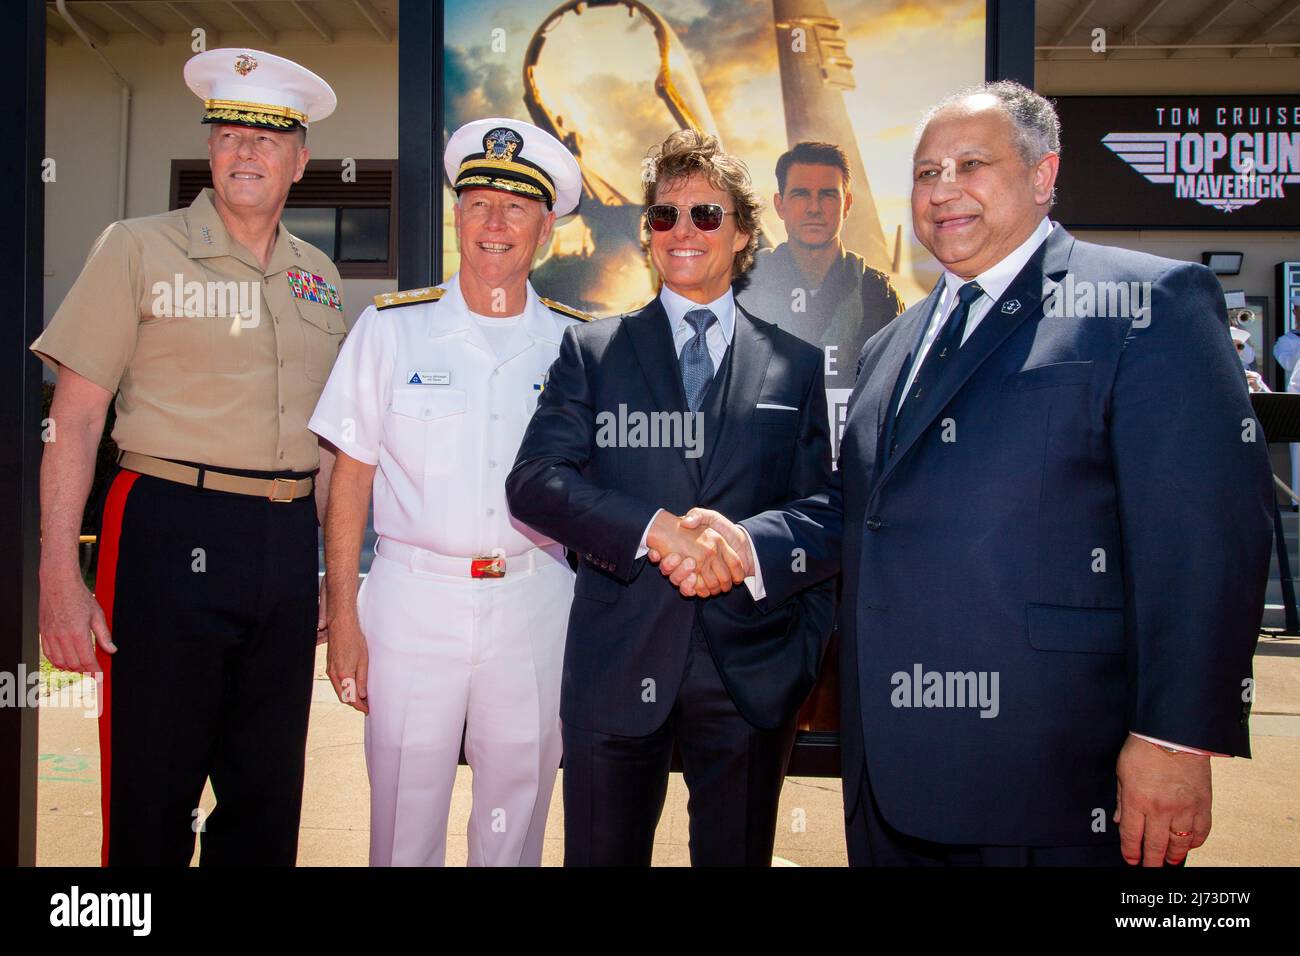 San Diego, United States. 04 May, 2022. U.S. Secretary of the Navy Carlos Del Toro, right, shakes hands with American actor Tom Cruise, center, alongside  Lt. Gen. Mark Wise, left, and Vice Adm. Kenneth Whitesell, on the red carpet during the advance movie premiere of Top Gun: Maverick, at Naval Air Station North Island, May 4, 2022 in San Diego, California,  Credit: MC2 Olympia McCoy/US Navy/Alamy Live News Stock Photo